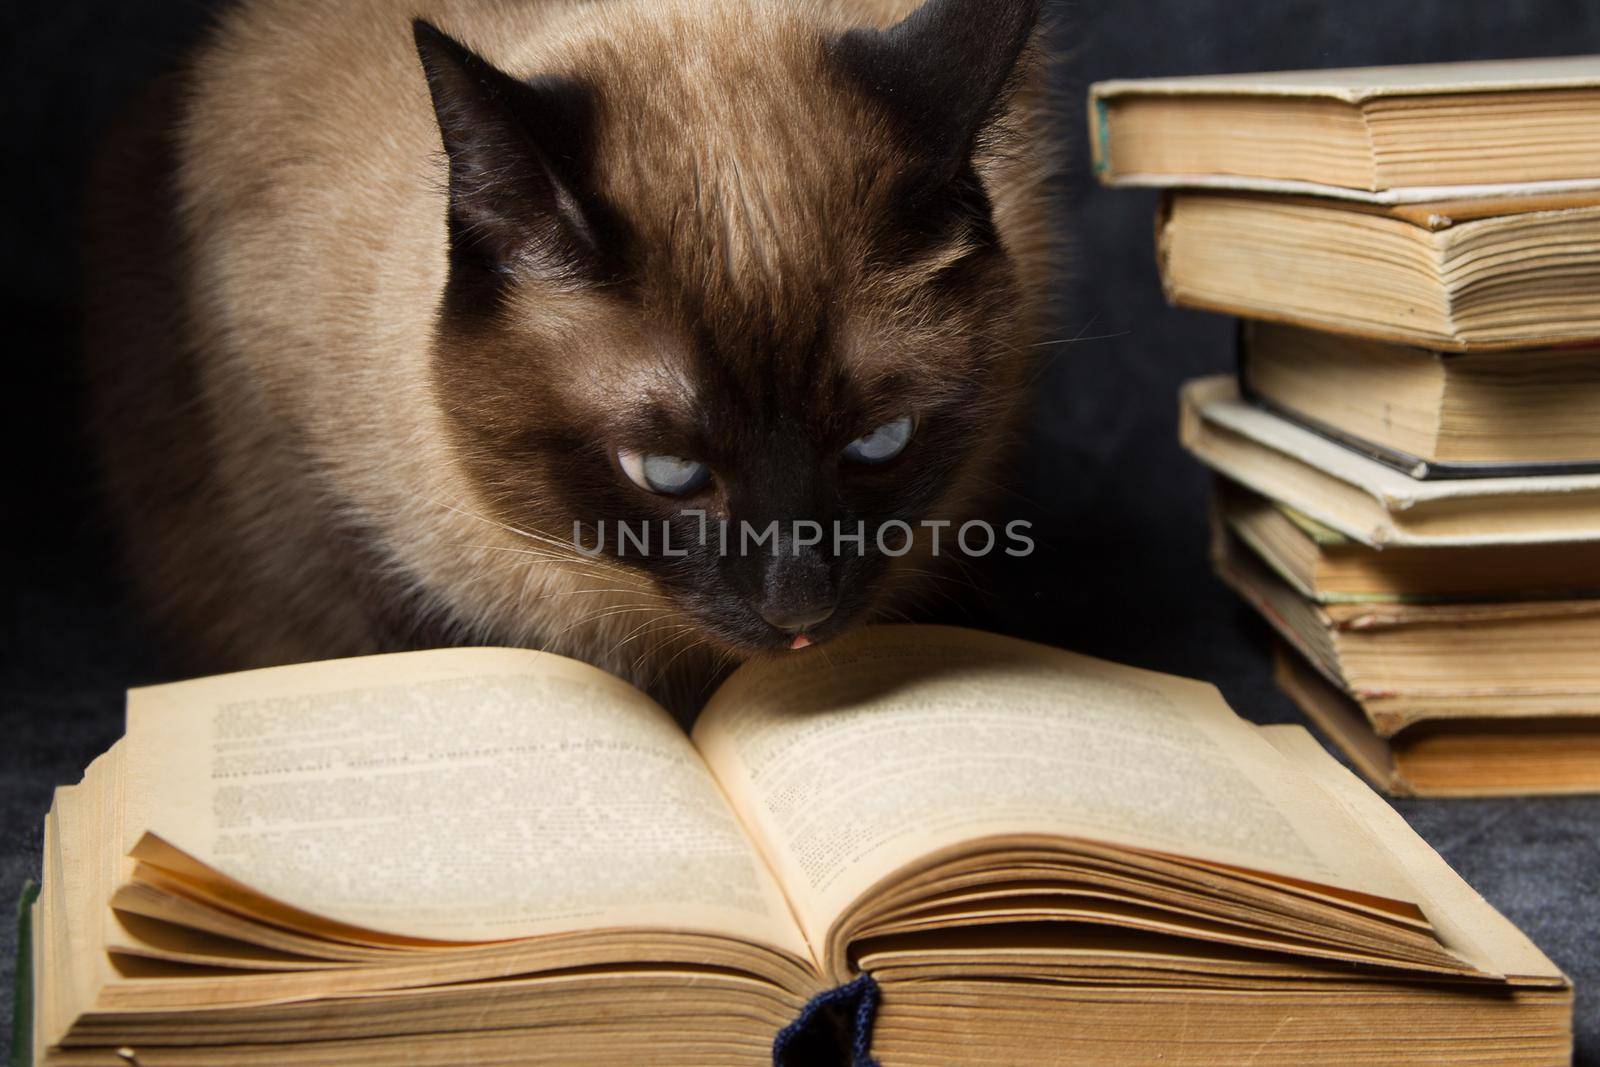 The cat reads the book